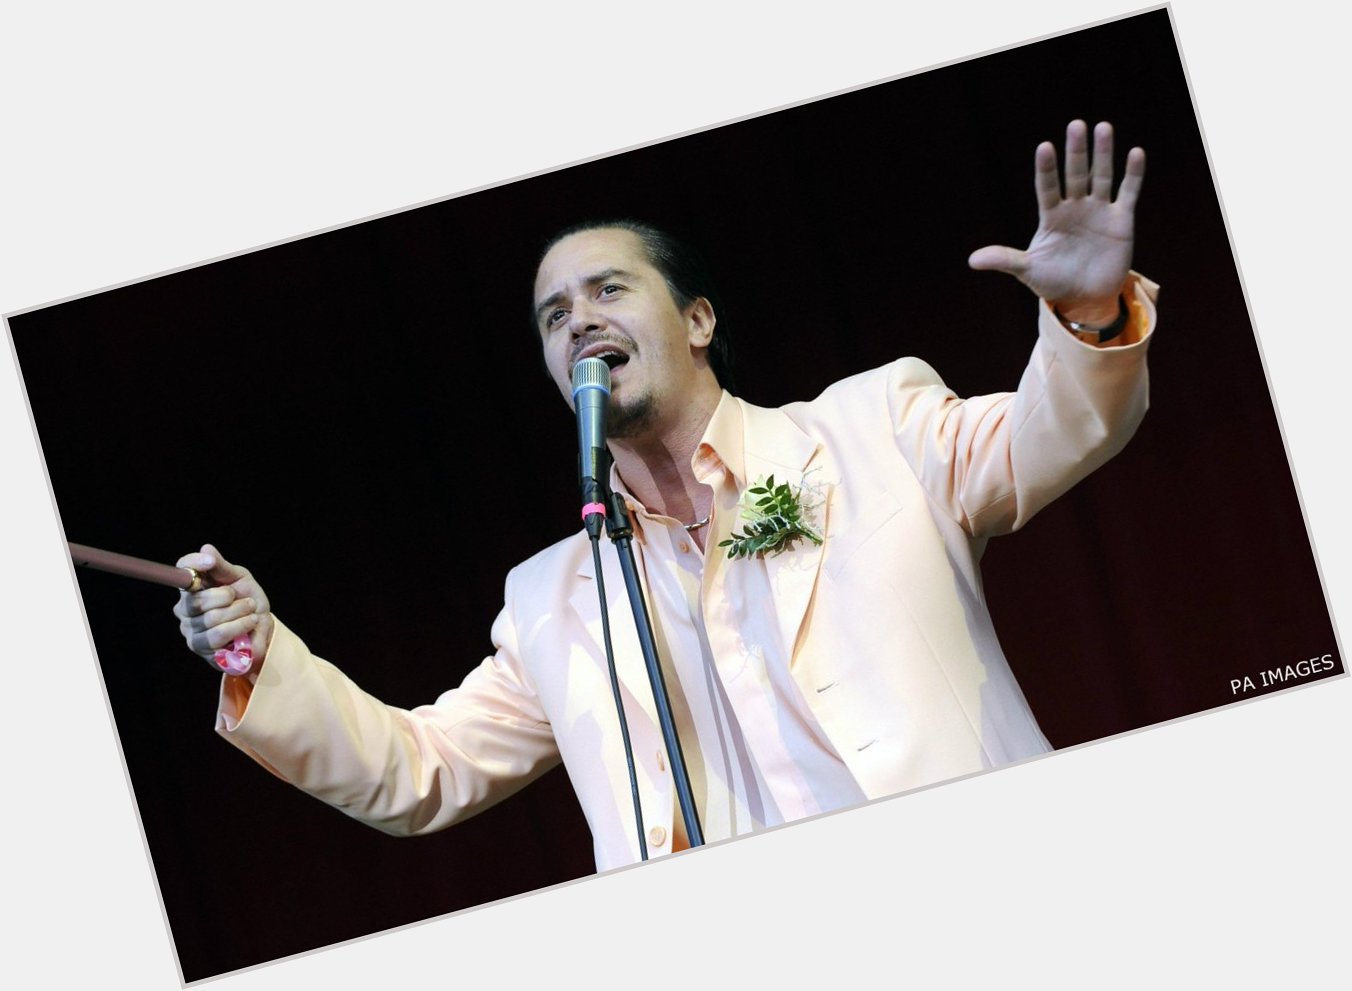 King for a day - Mr. Mike Patton of - Celebrating his 47th. Happy birthday! 